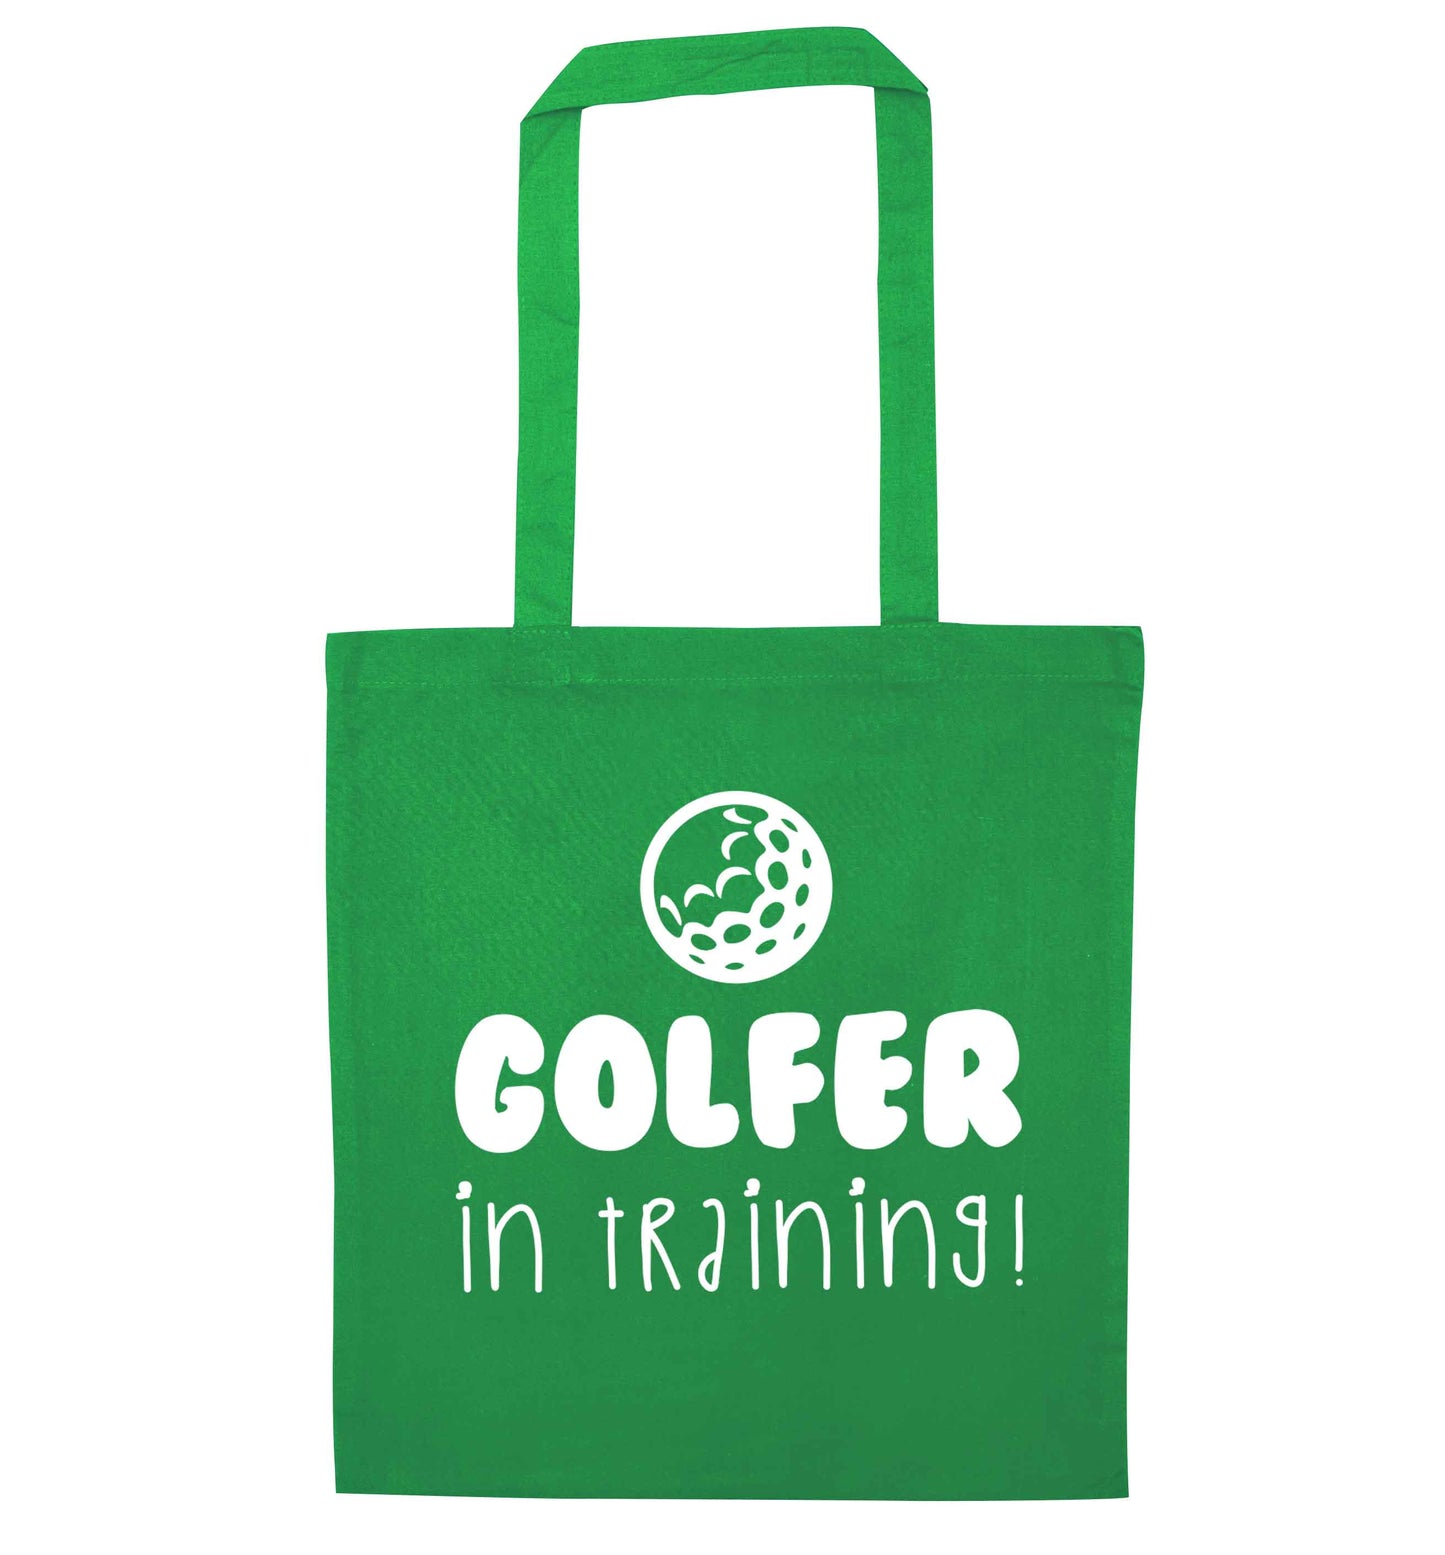 Golfer in training green tote bag